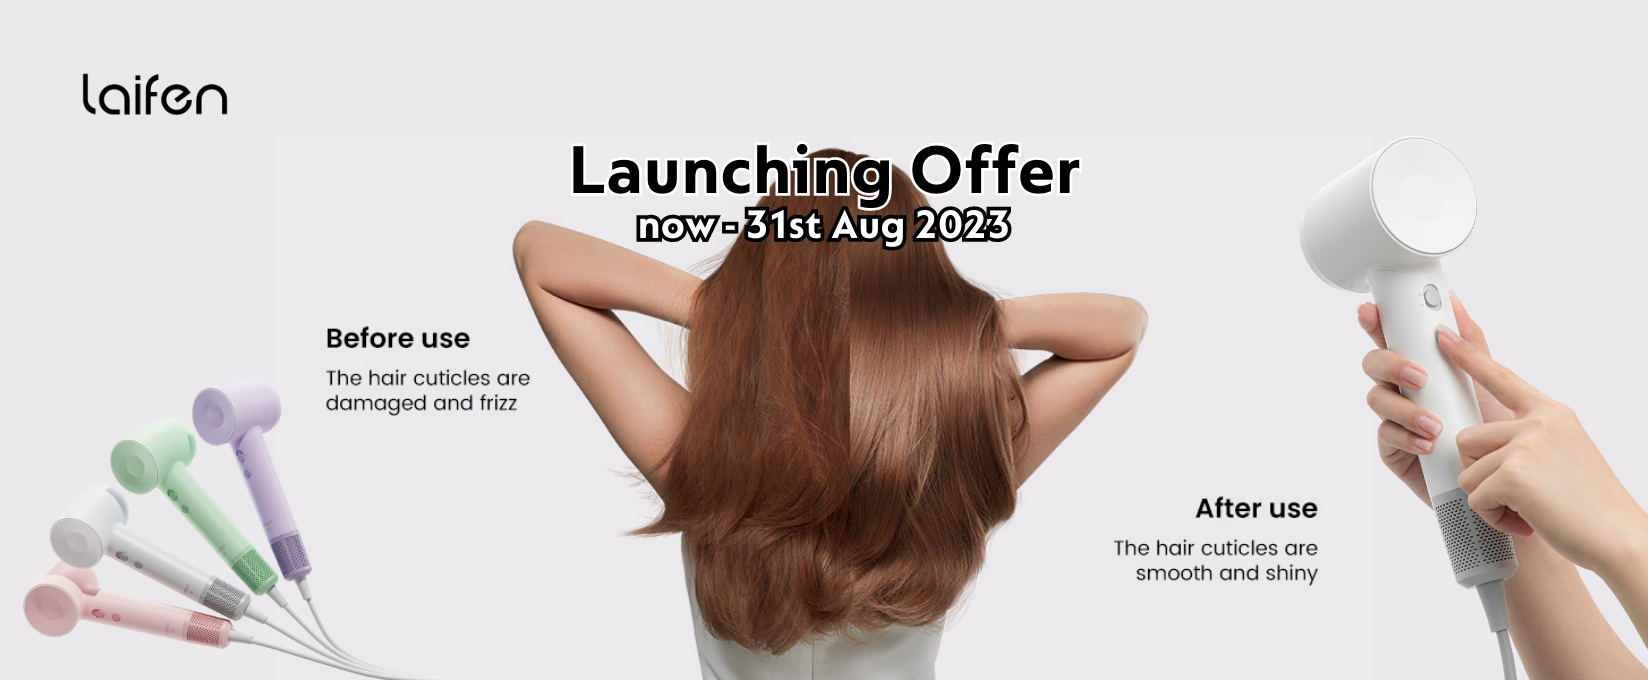 Laifen Launching Offer Banner